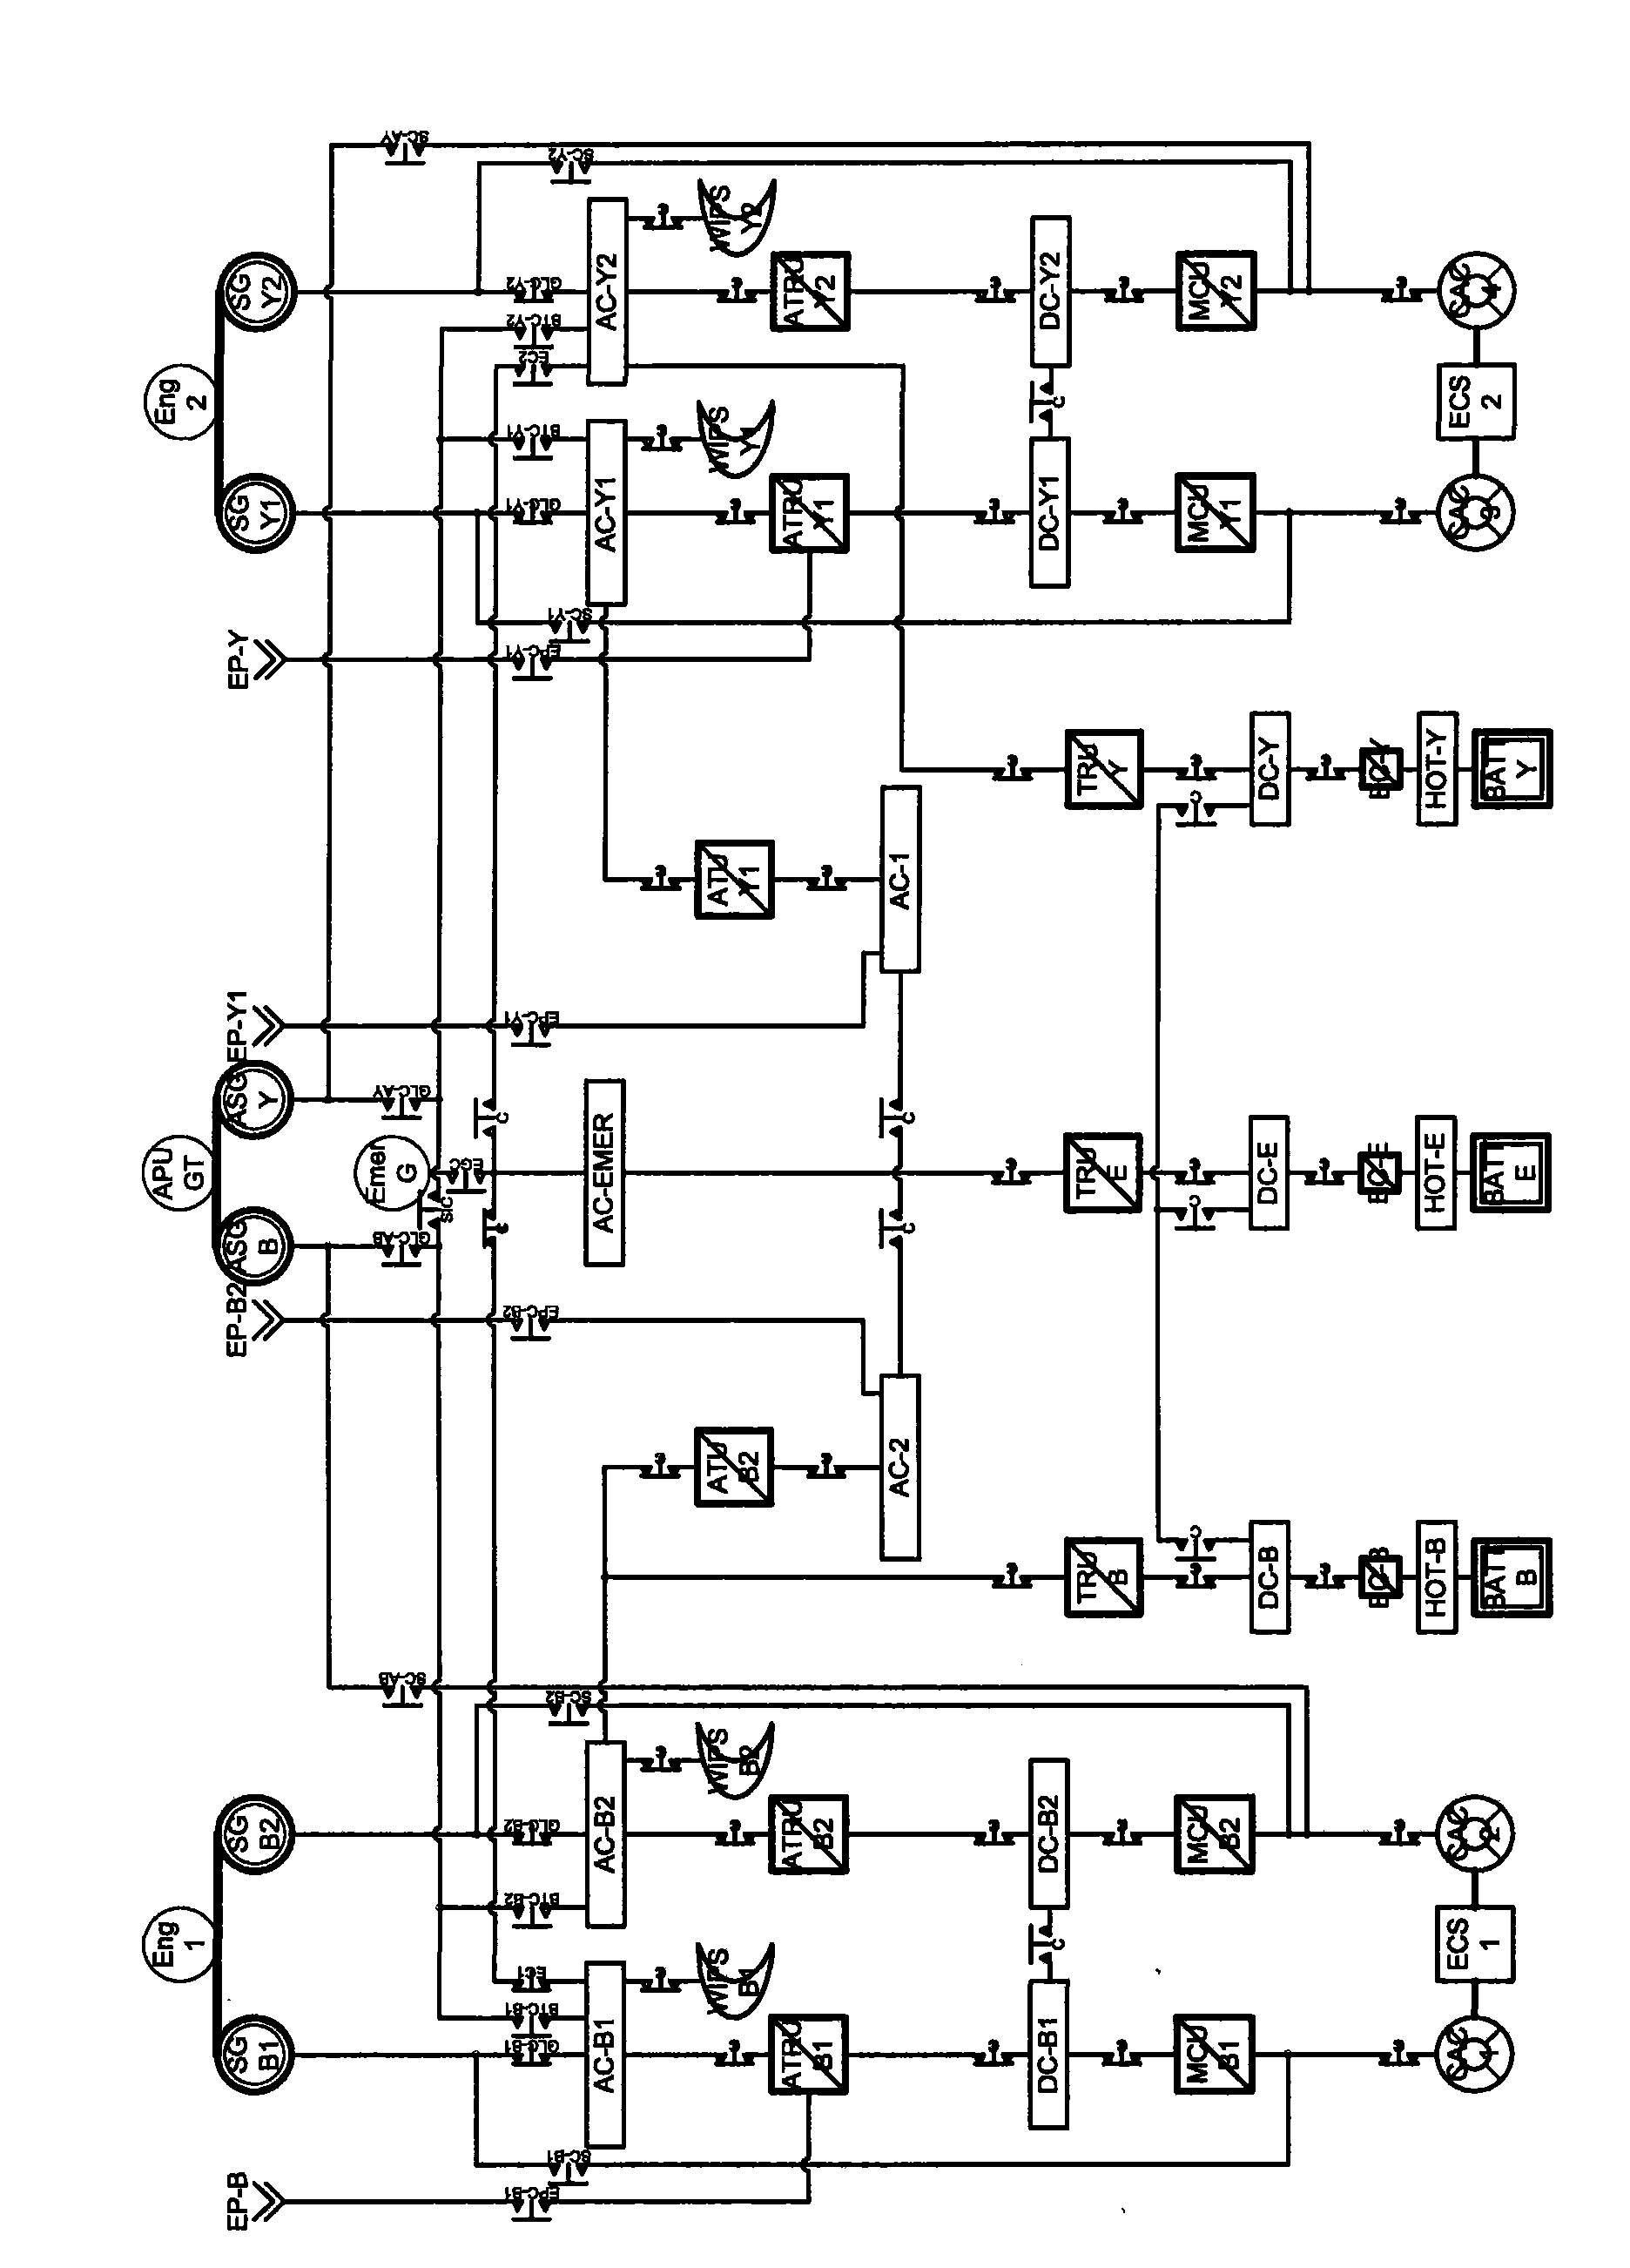 System for generating, converting, distributing and electrically starting on board an aircraft